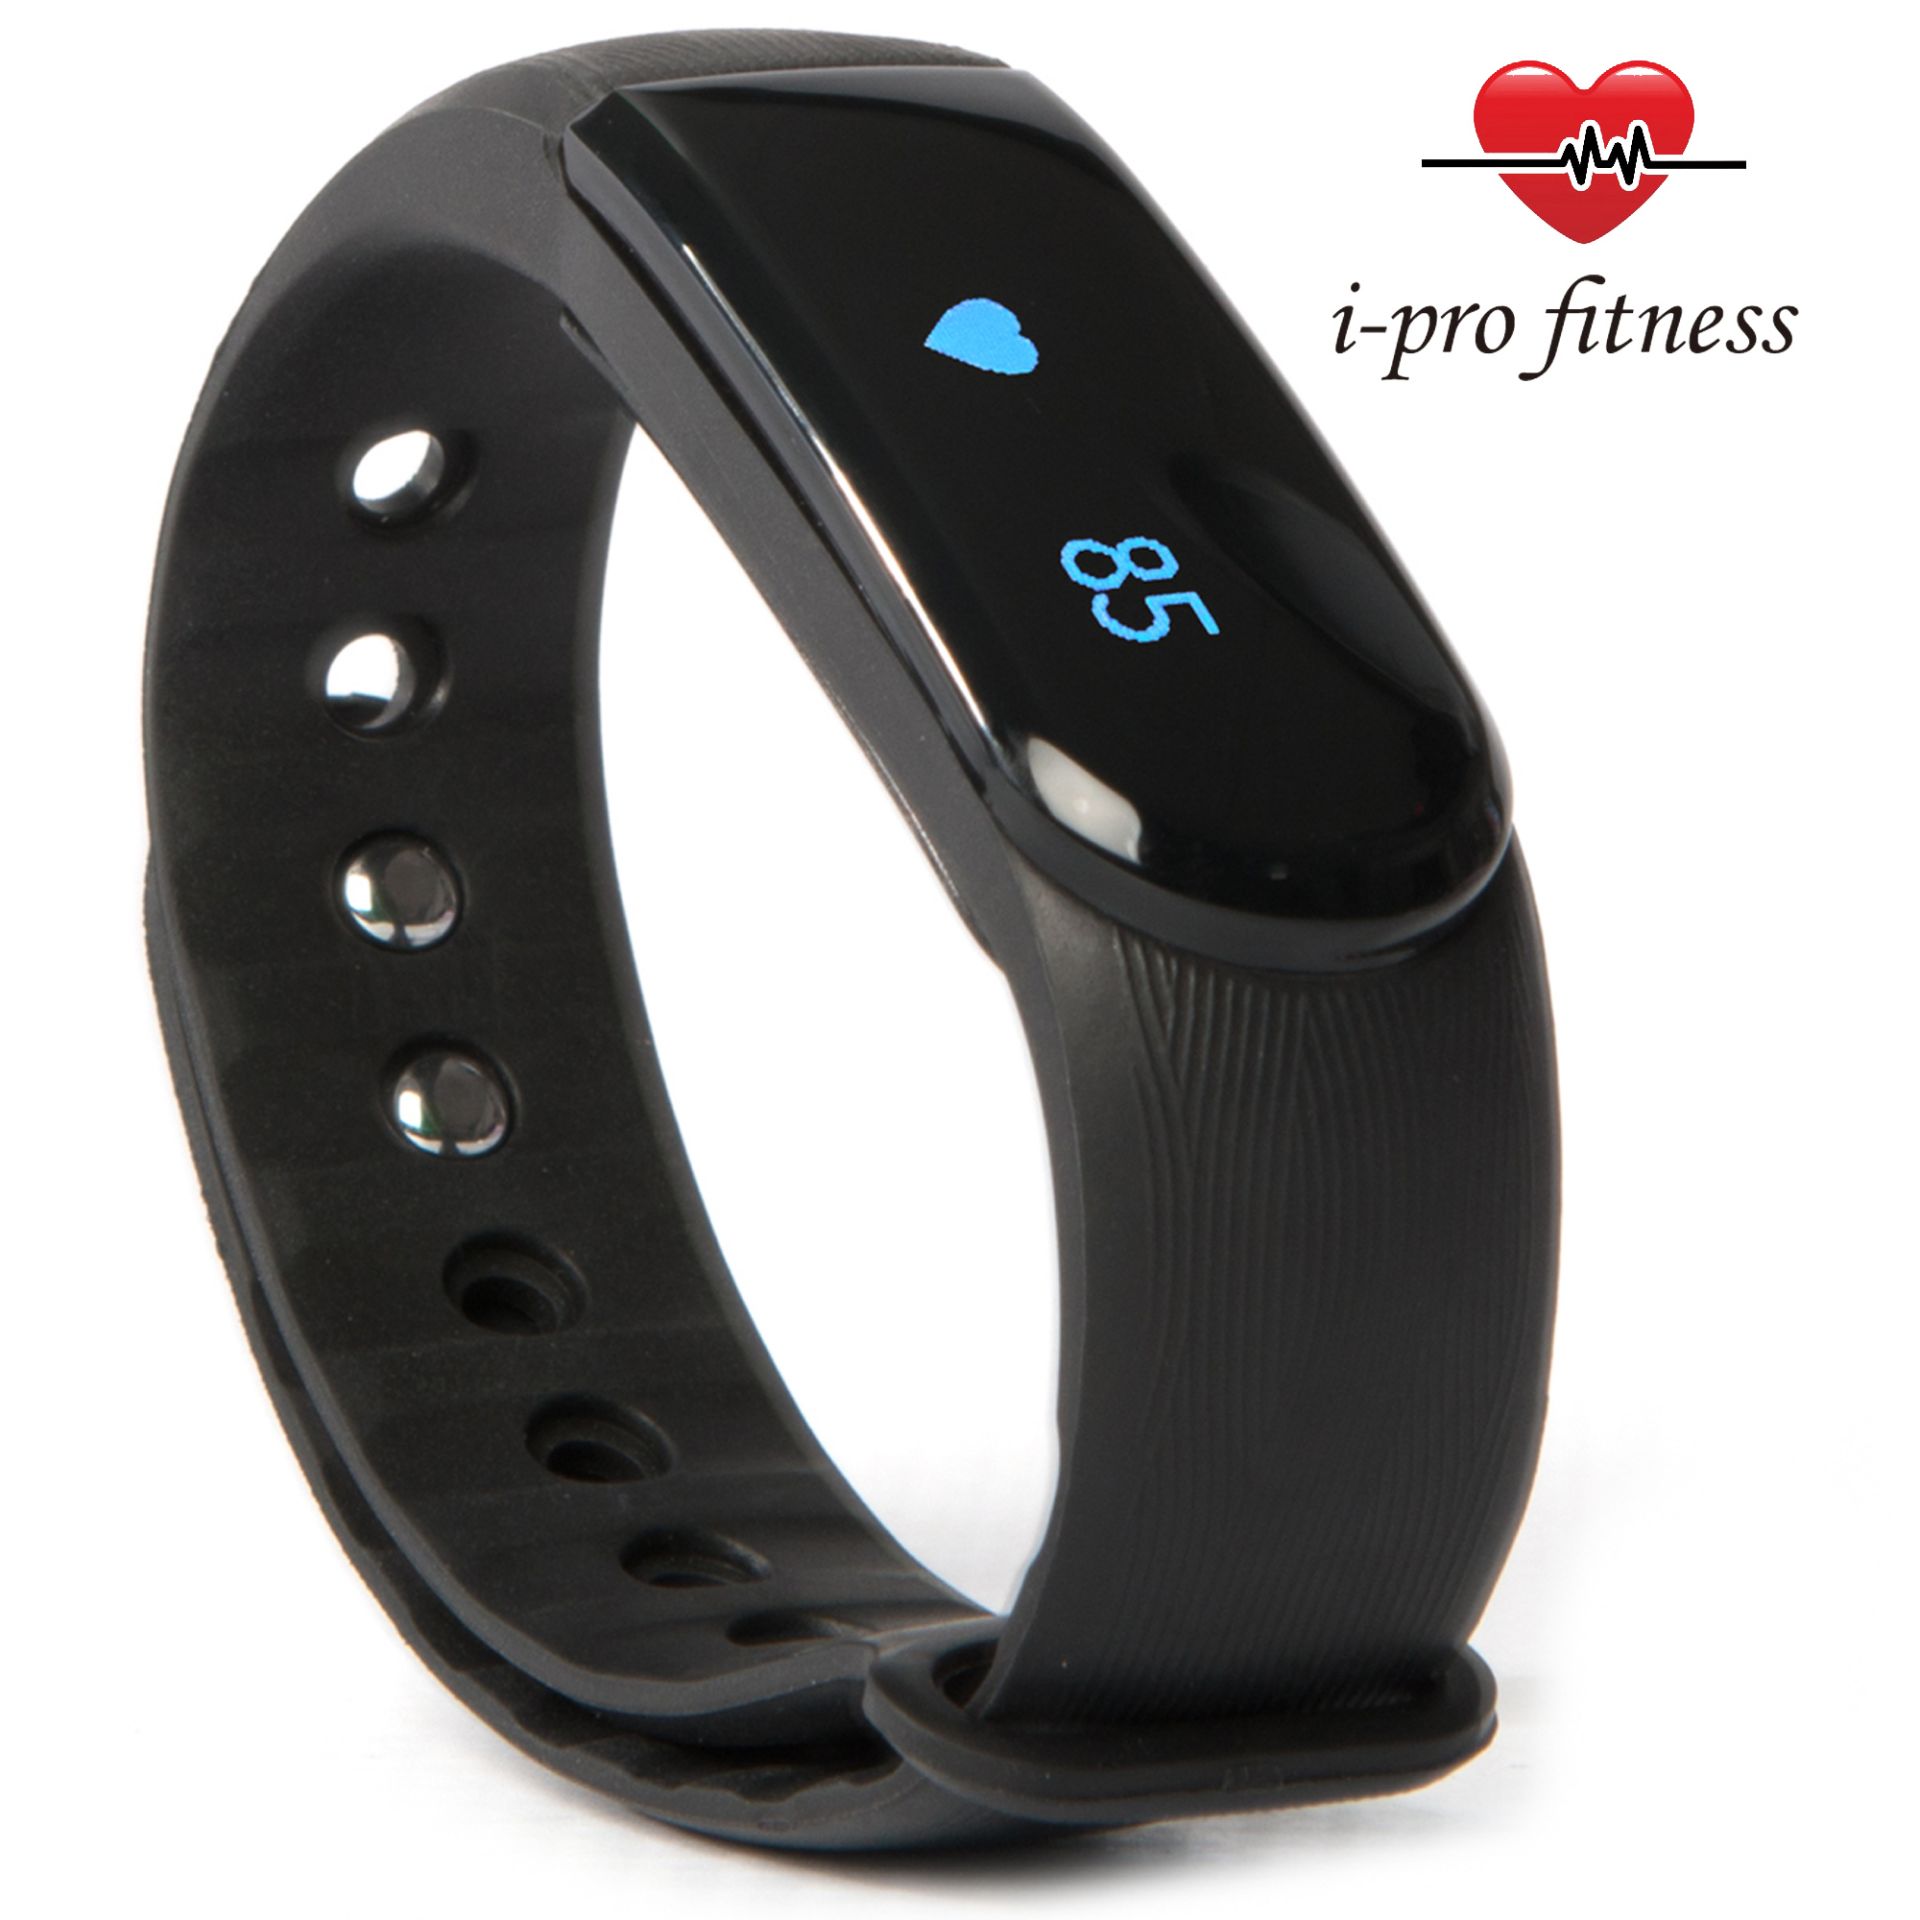 **Bulk Buy** 10X I-Pro Id101 Fitness Tracker Seamless Pairing With Veryfit 2.0 App Bluetooth - Image 5 of 5